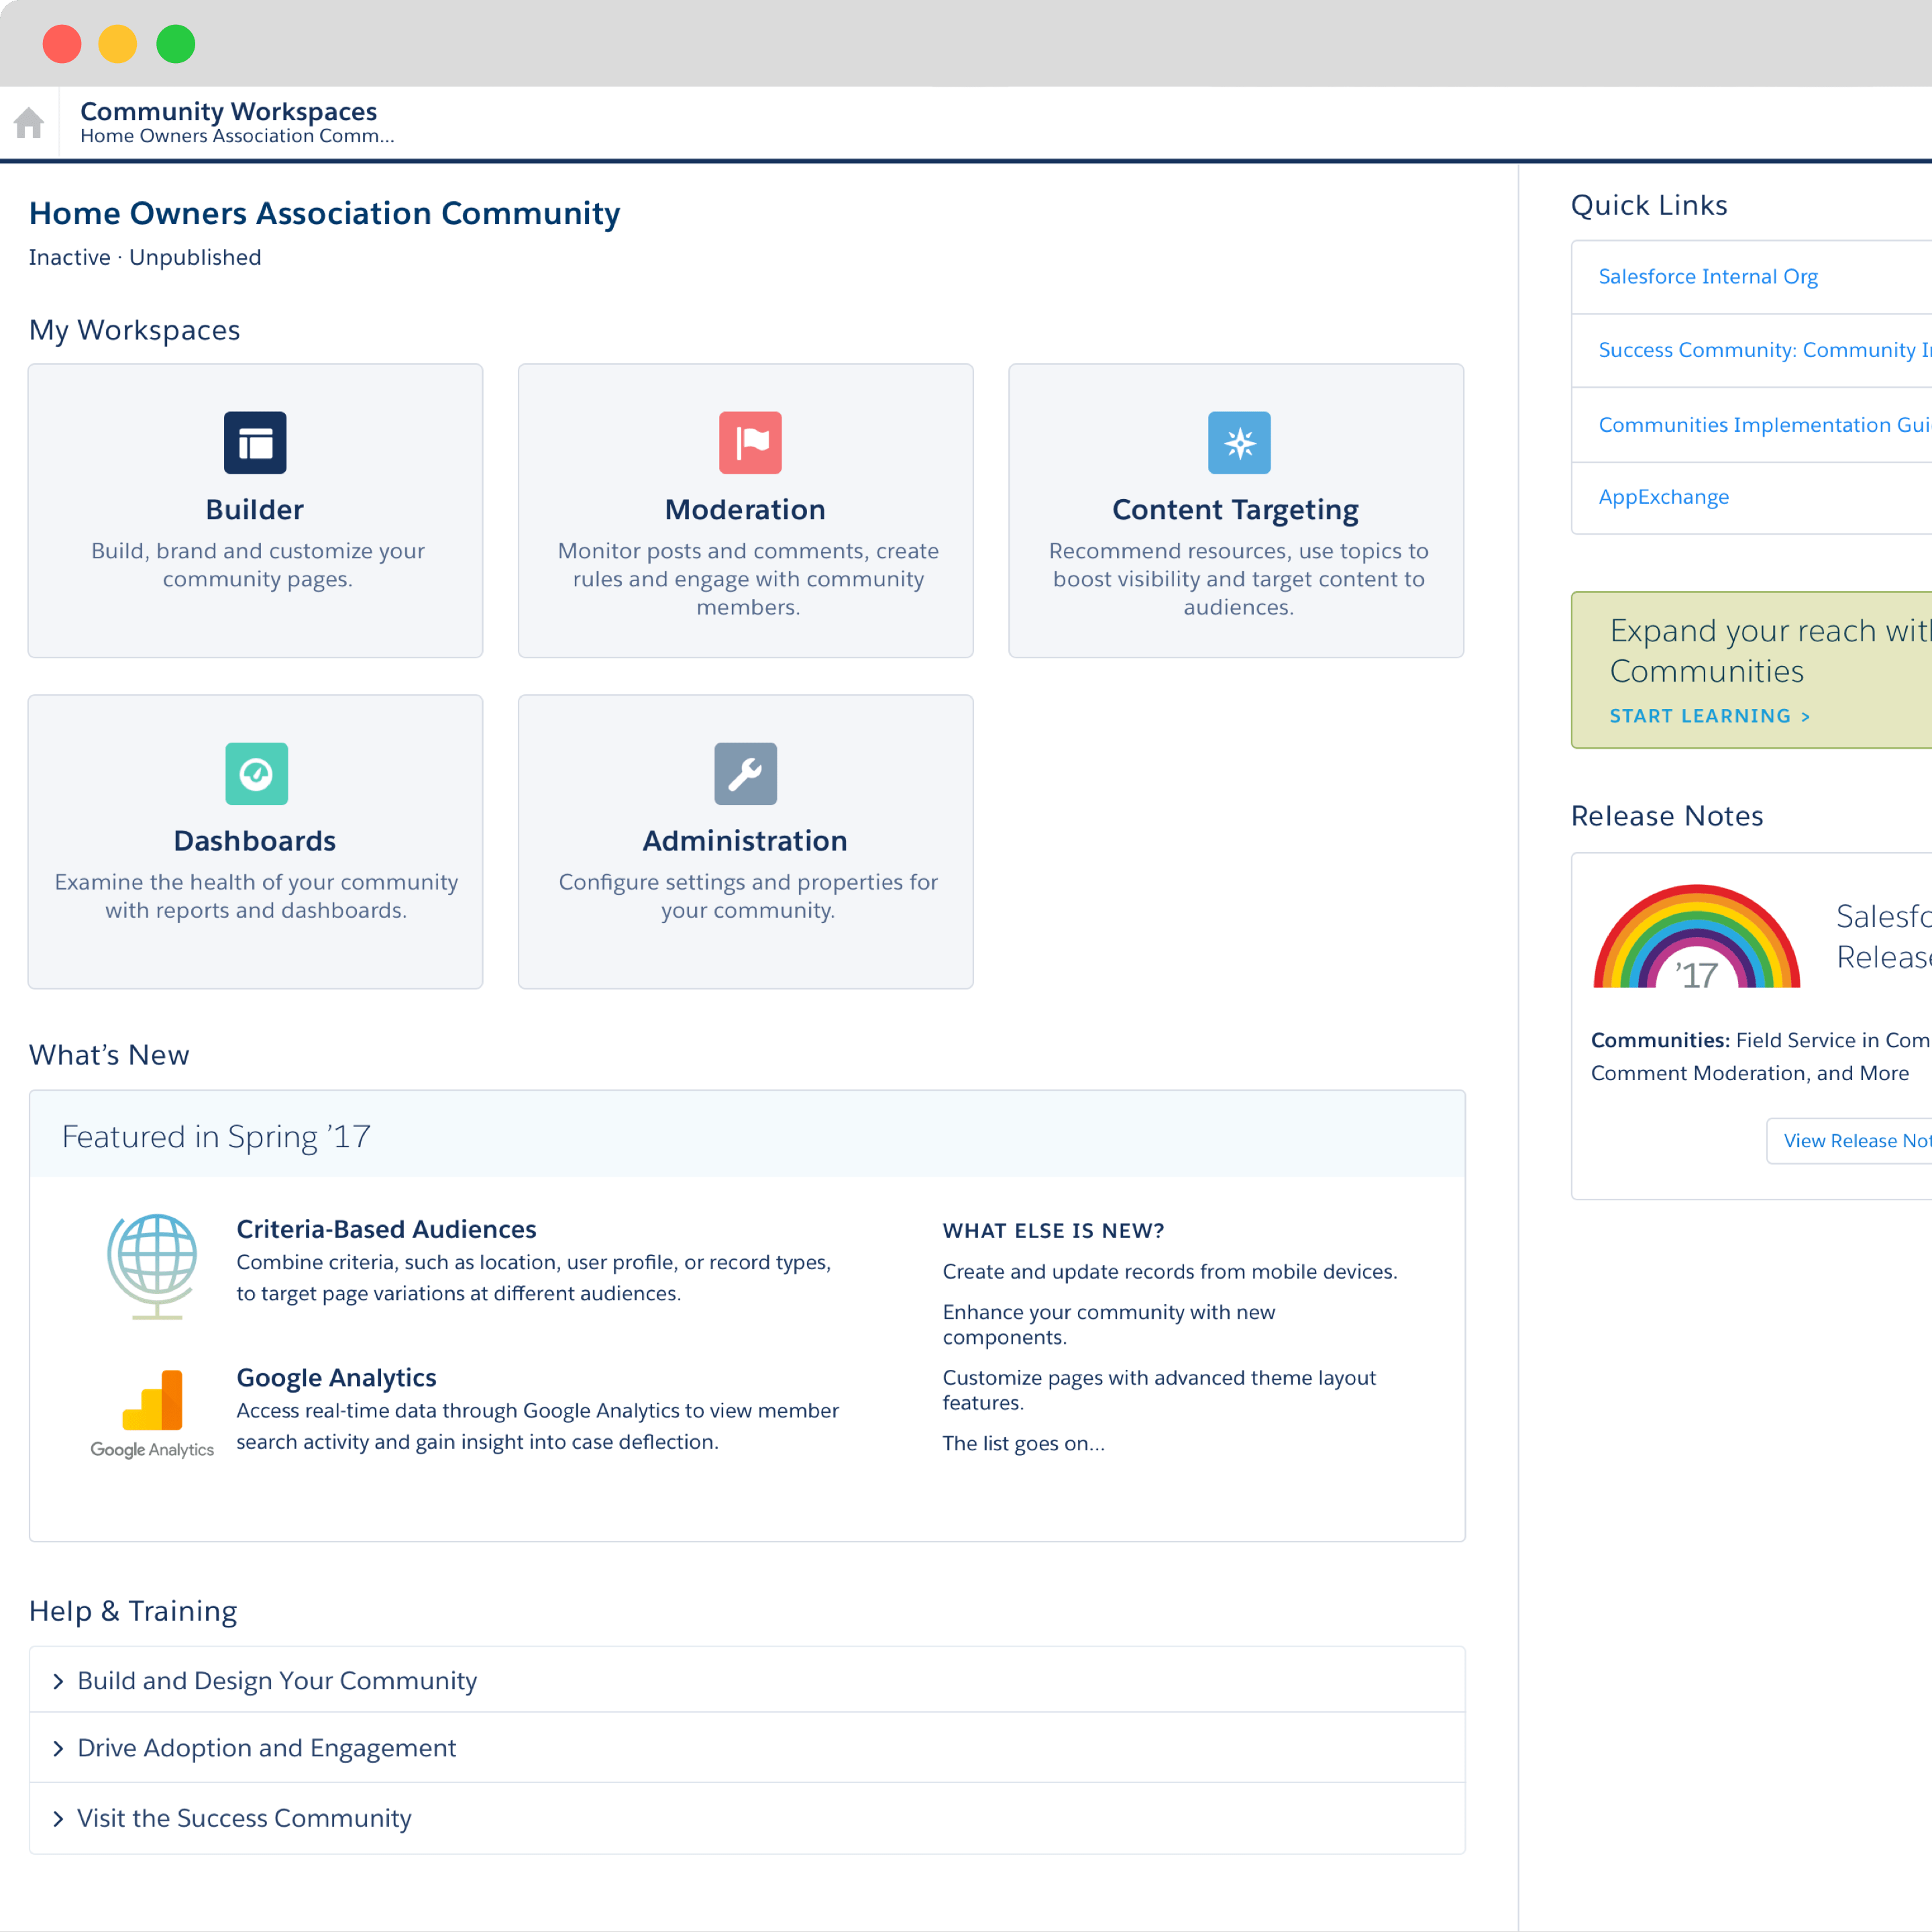 A website showing various community management apps, such as website building, forum moderation, and analytics.